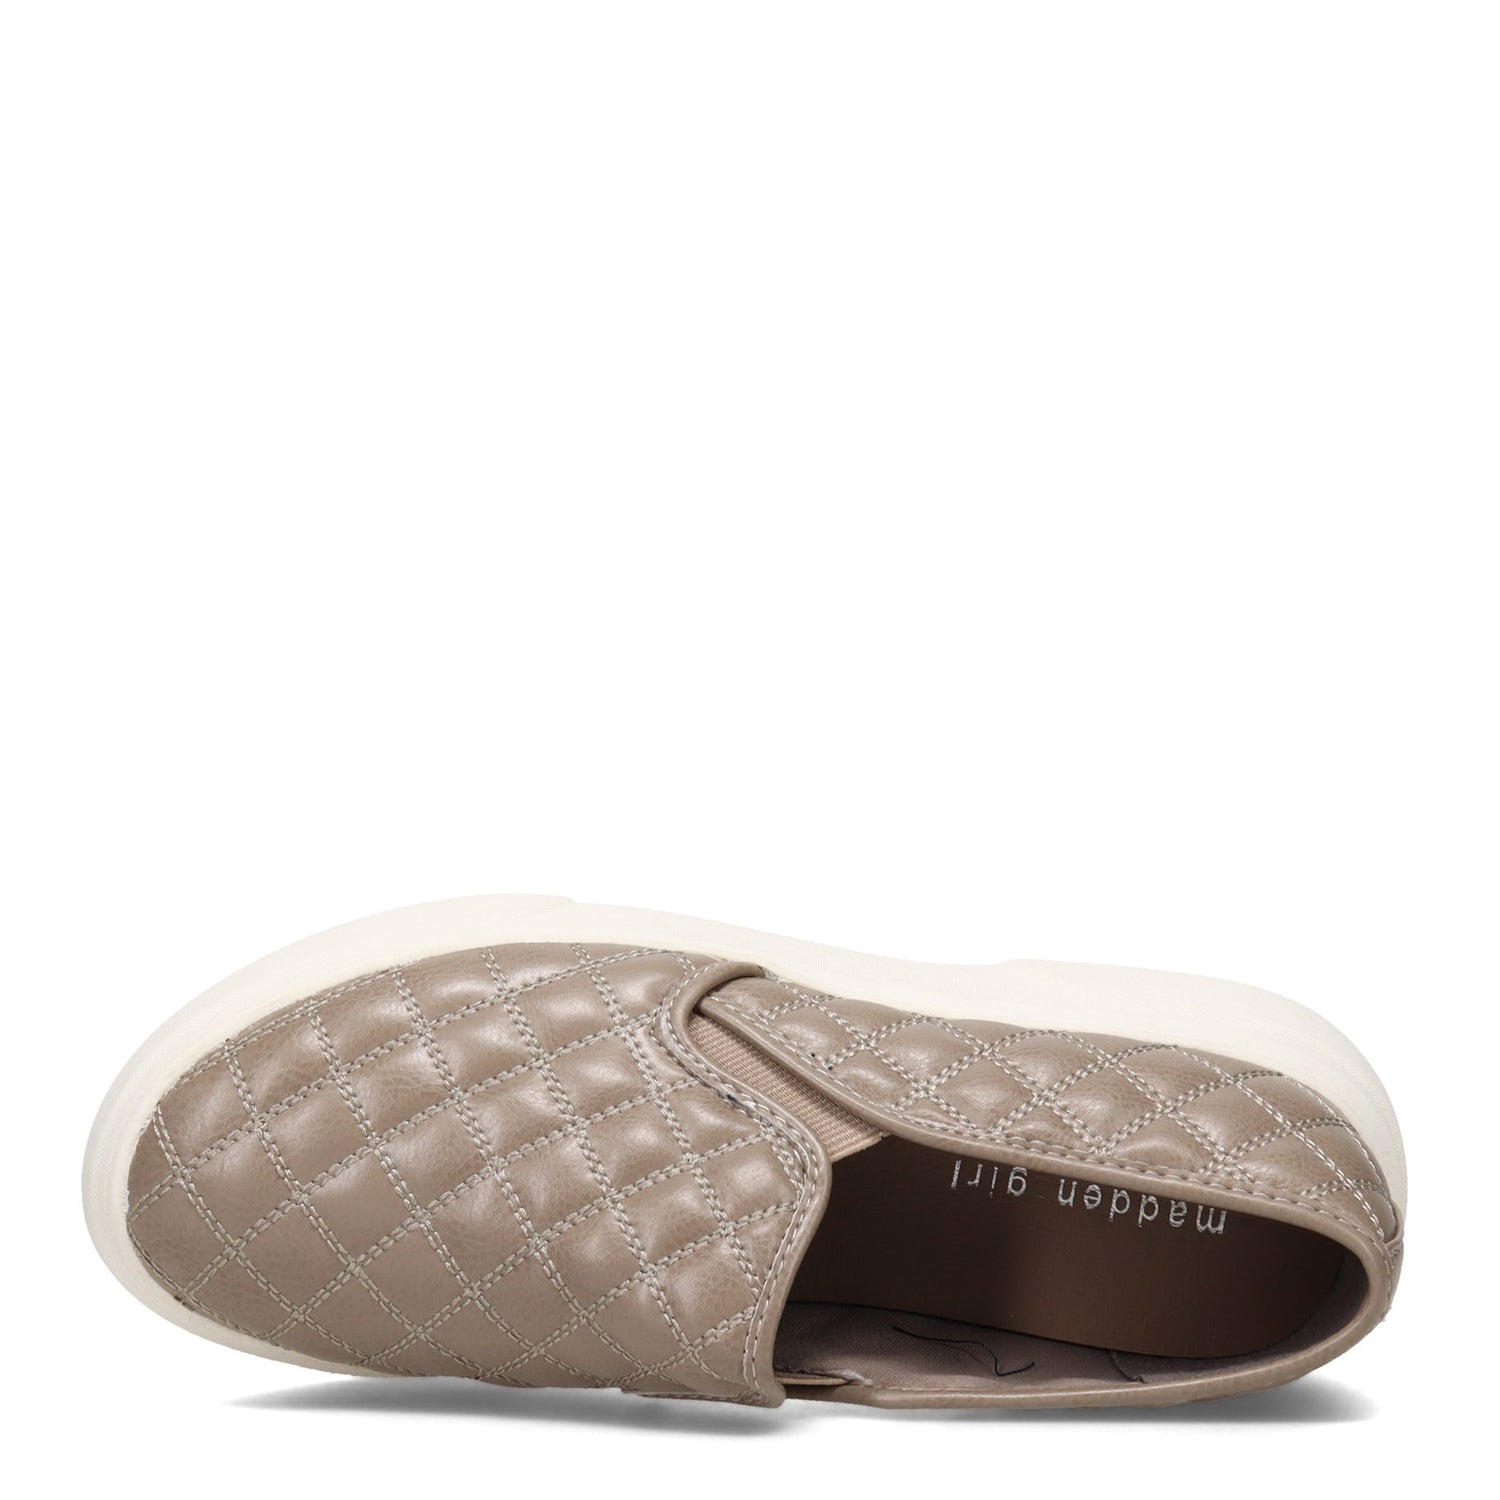 Peltz Shoes  Women's Madden Girl Cupid Slip-On TAUPE CUPID-TAUPE